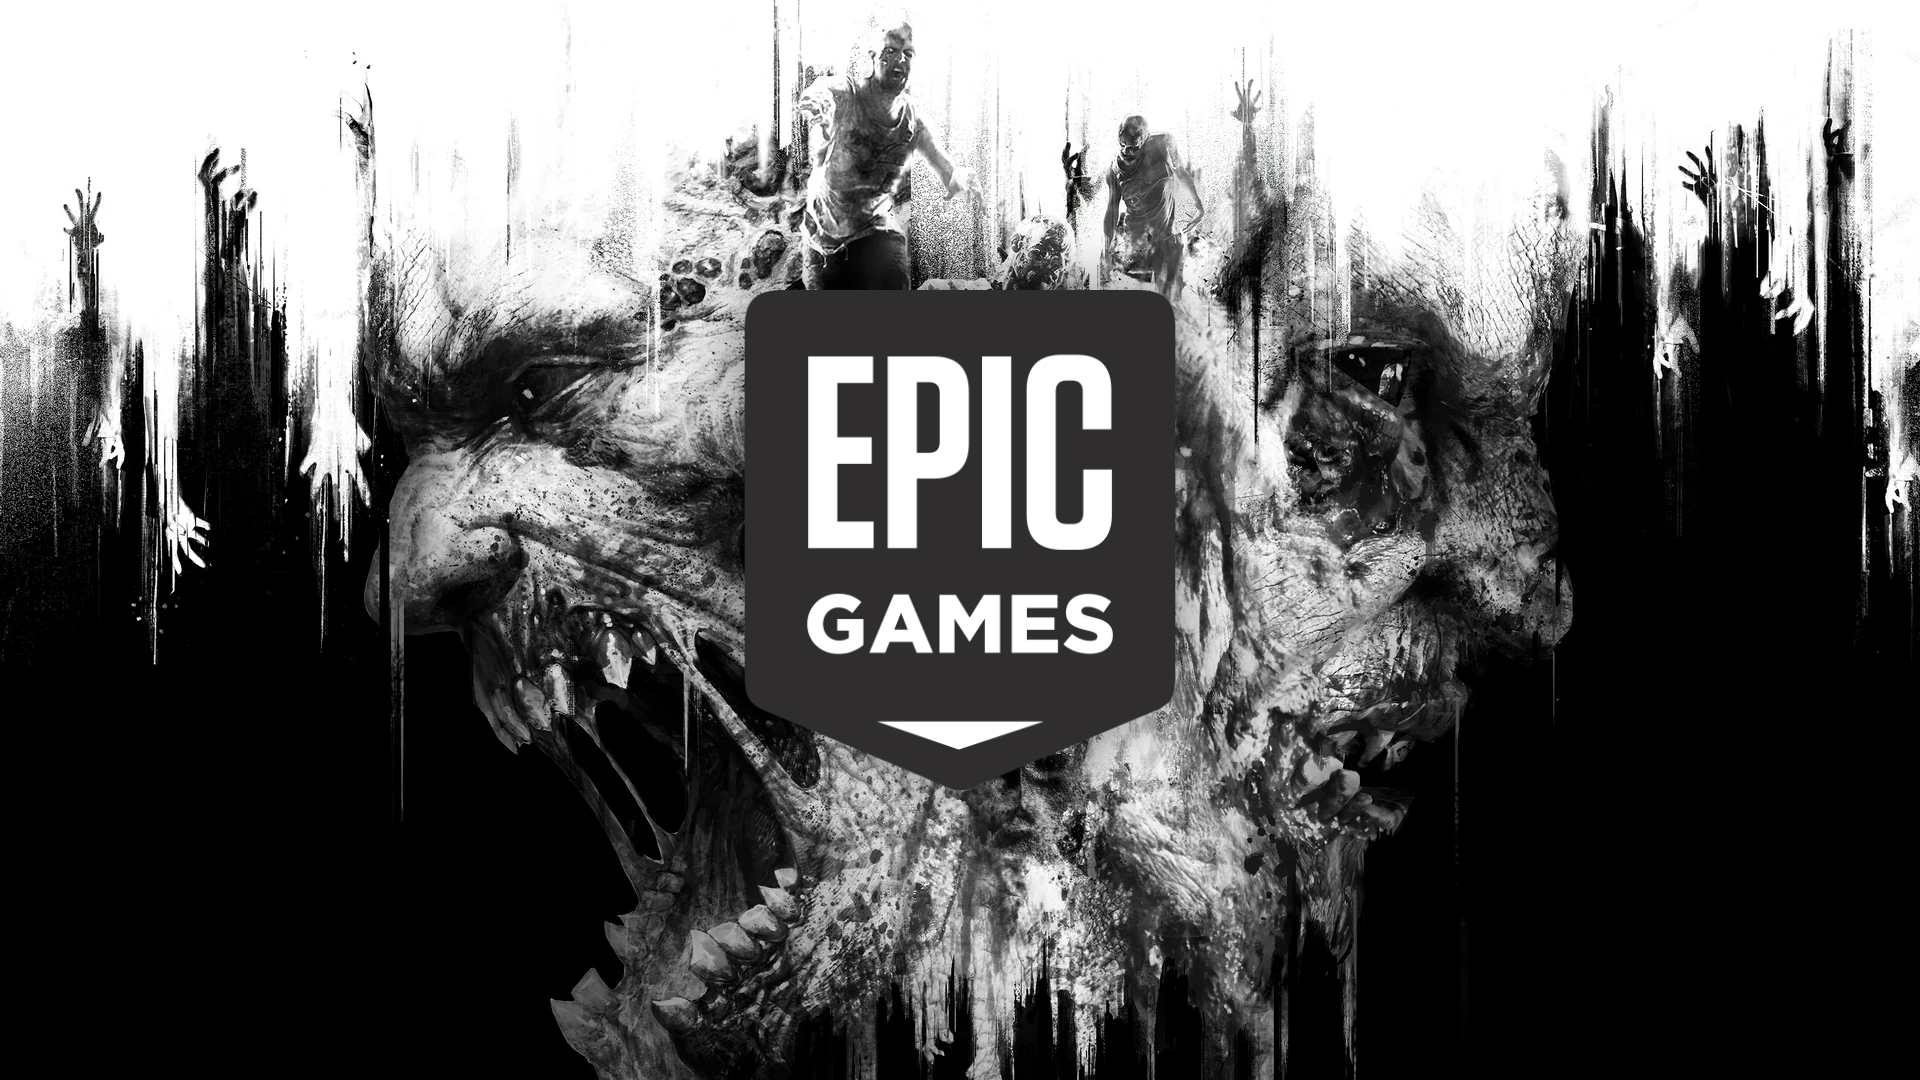 Dying Light: Enhanced Edition Will Reportedly Be Free On The Epic